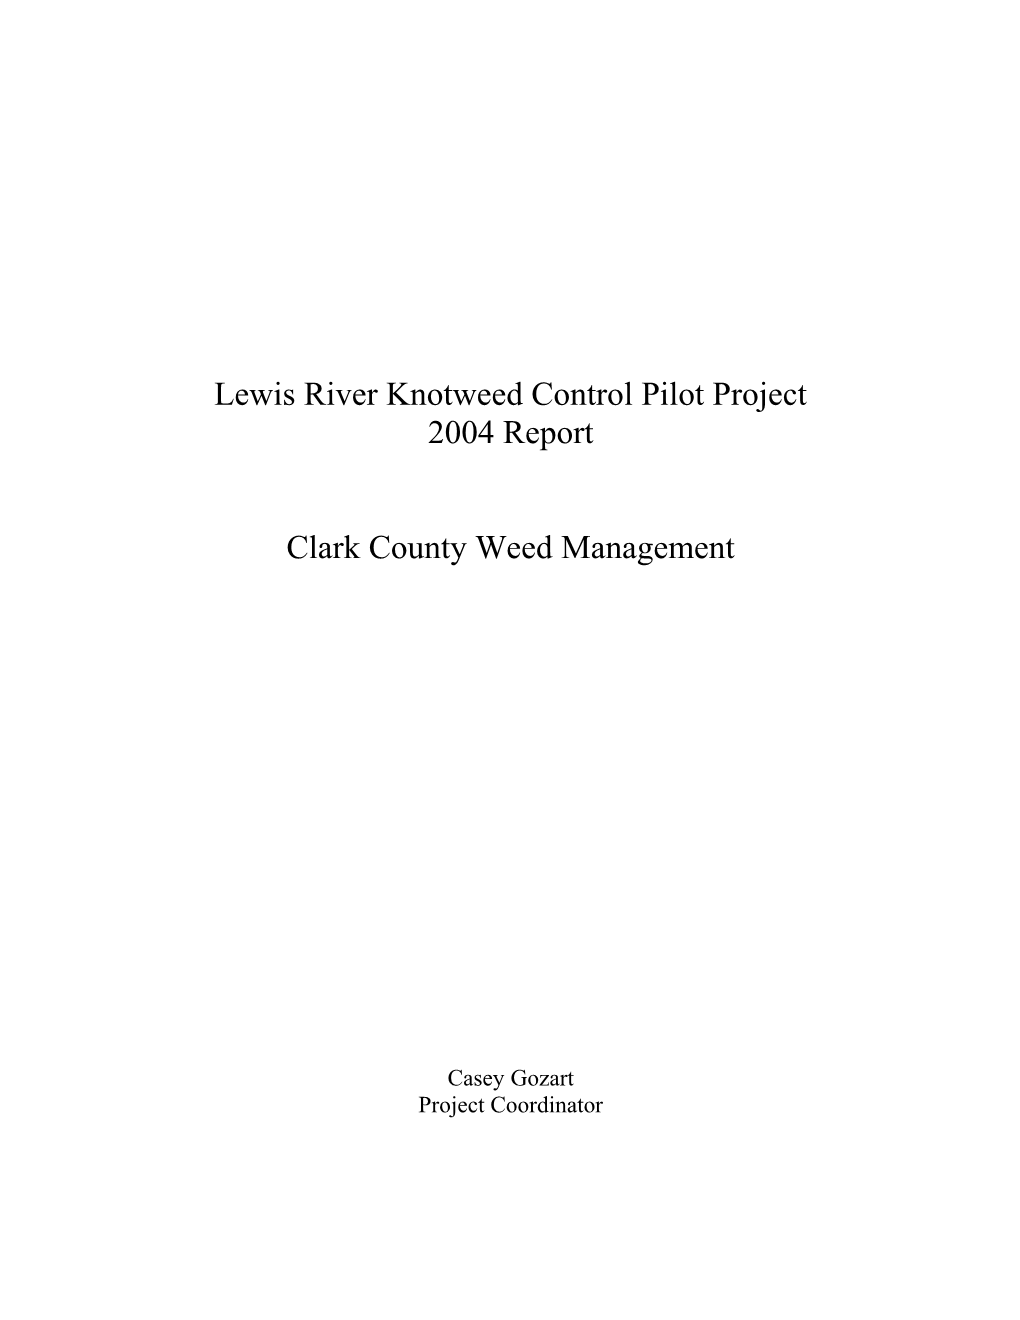 Clark County Weed Management Requested and Received Funds for a Knotweed Pilot Project